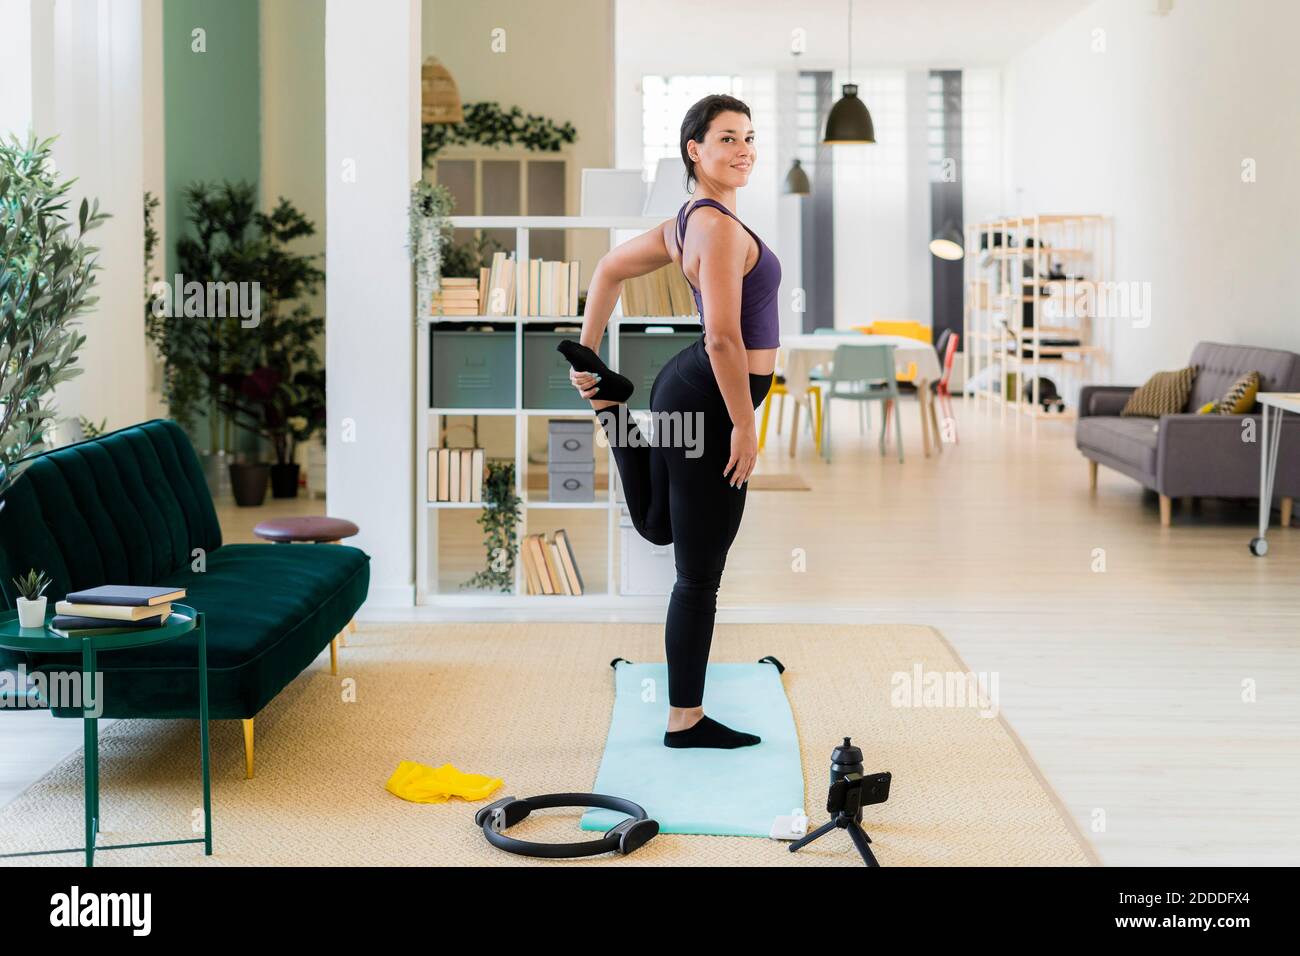 Smiling young woman standing on one leg video recording while standing at home Stock Photo